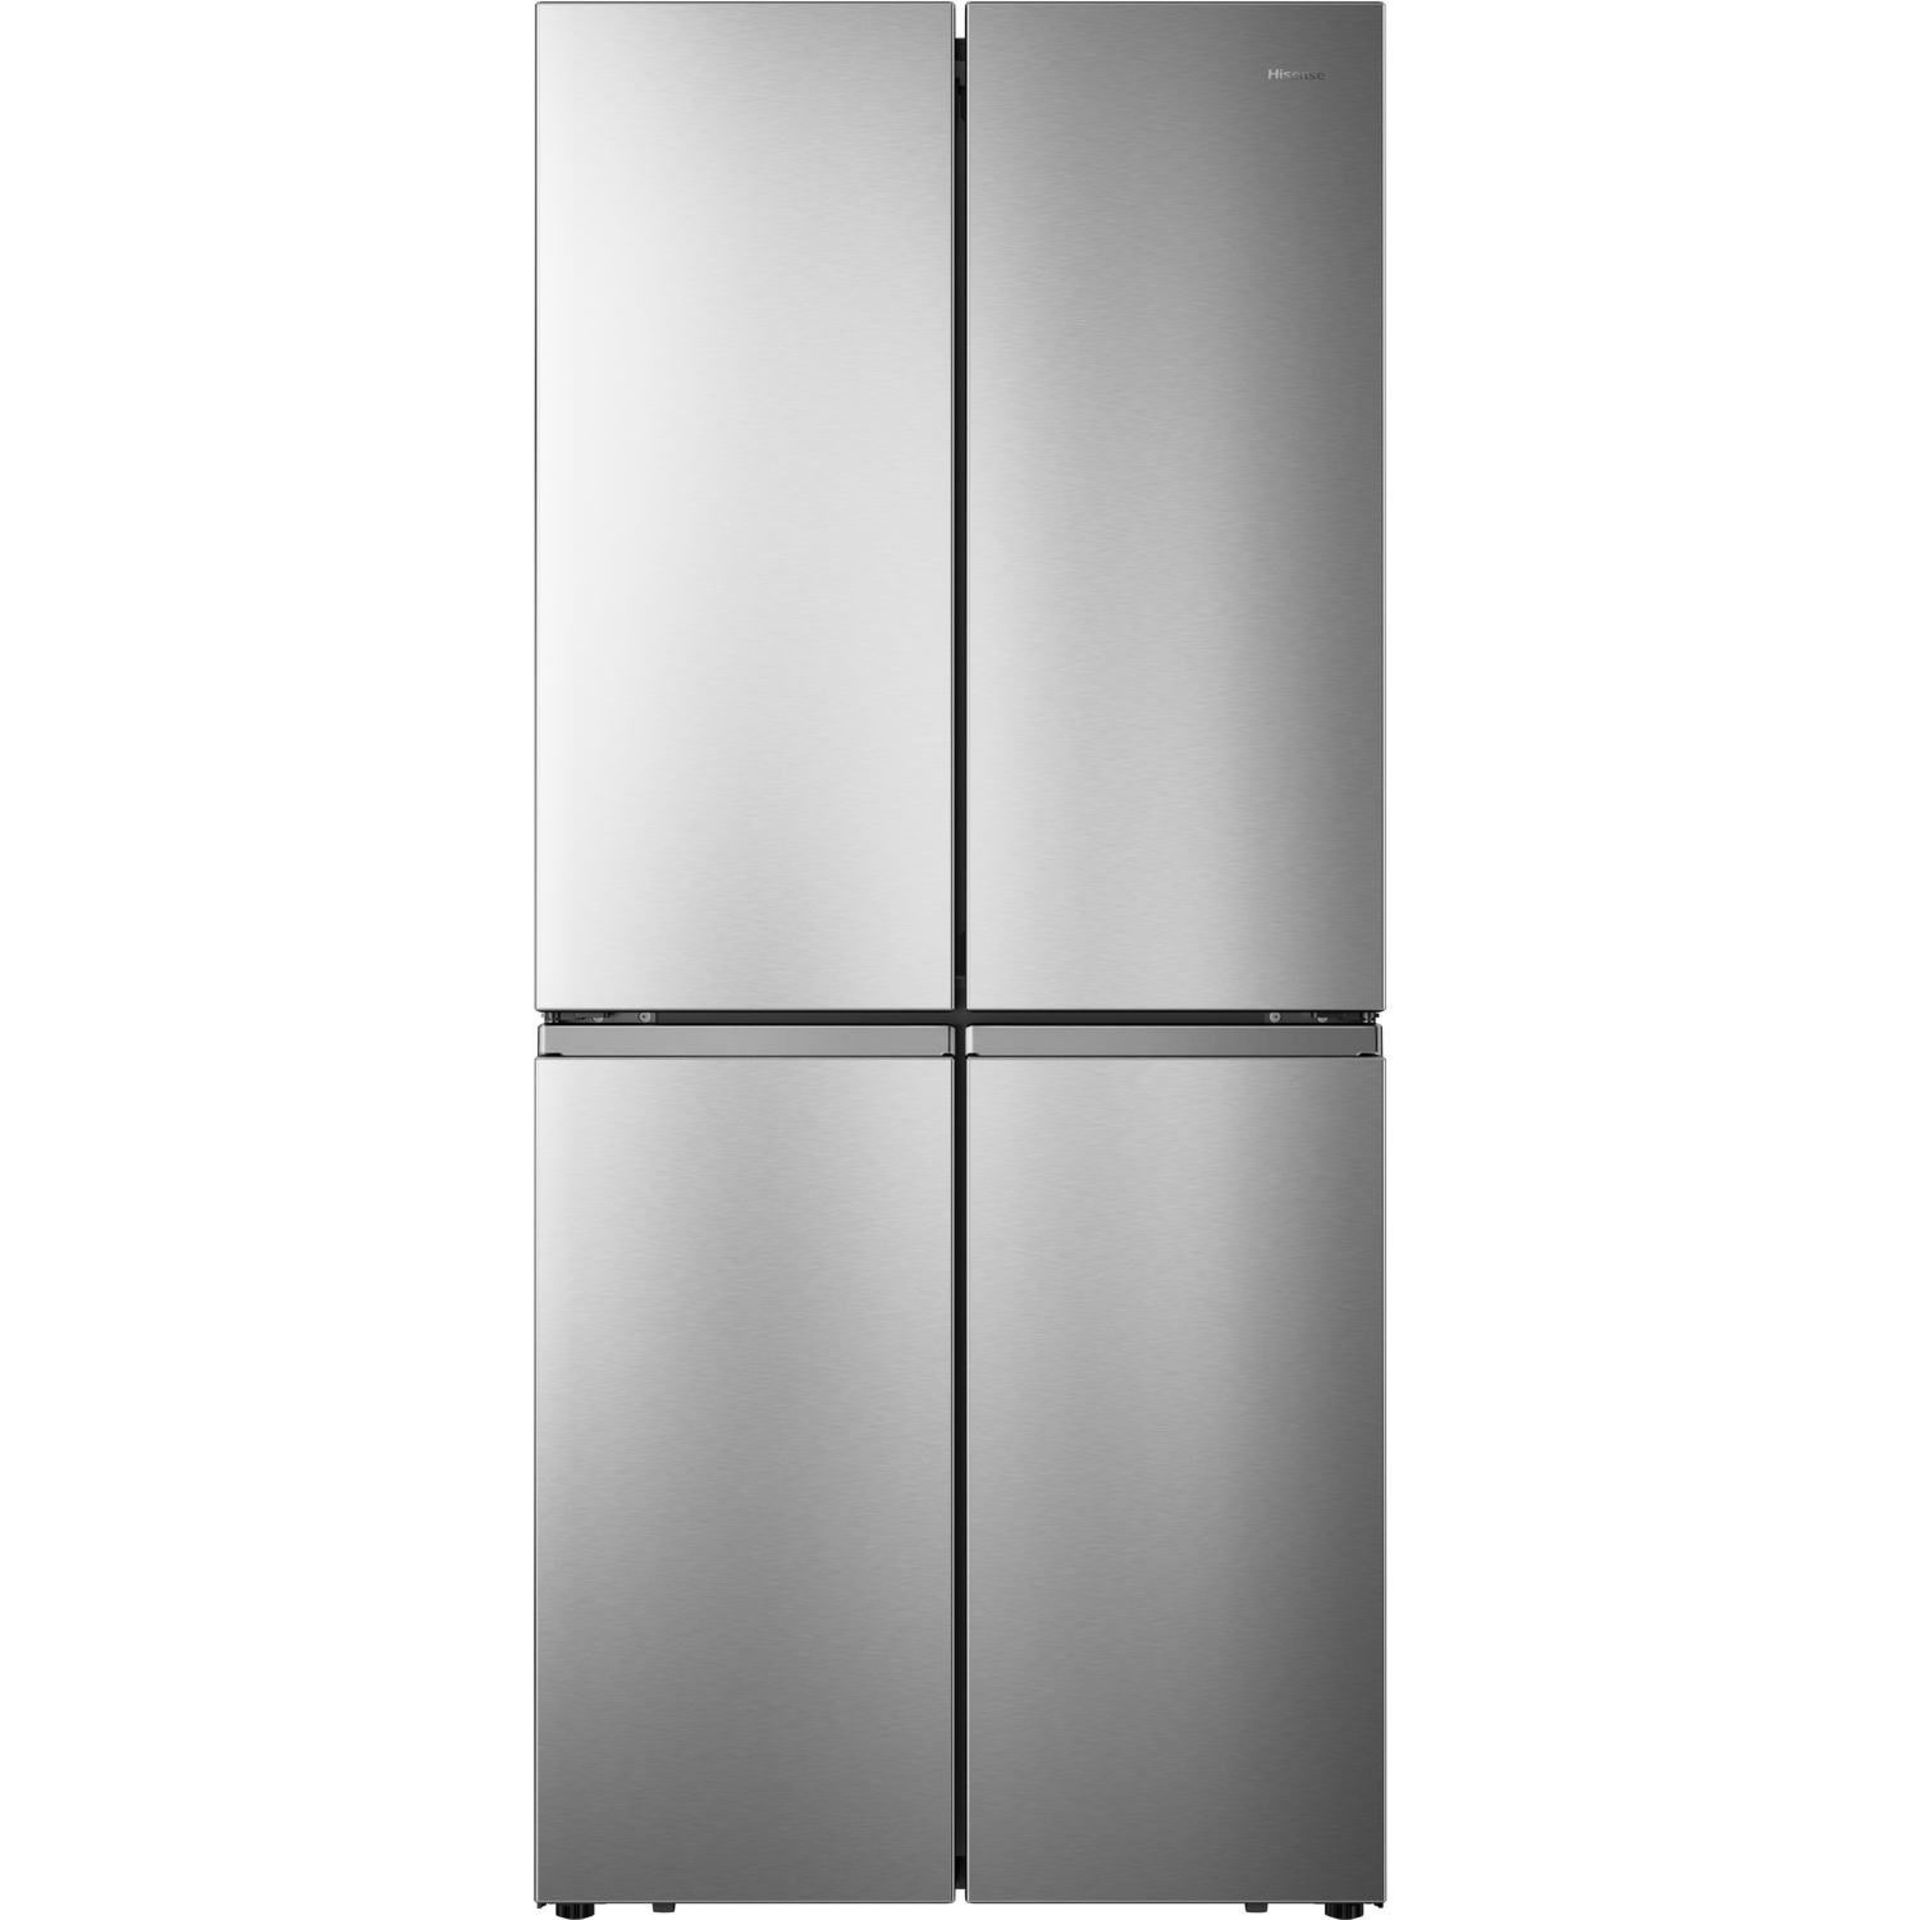 Hisense 432 Litre Four Door American Fridge Freezer With Dual Cooling - Stainless steel. - RRP £